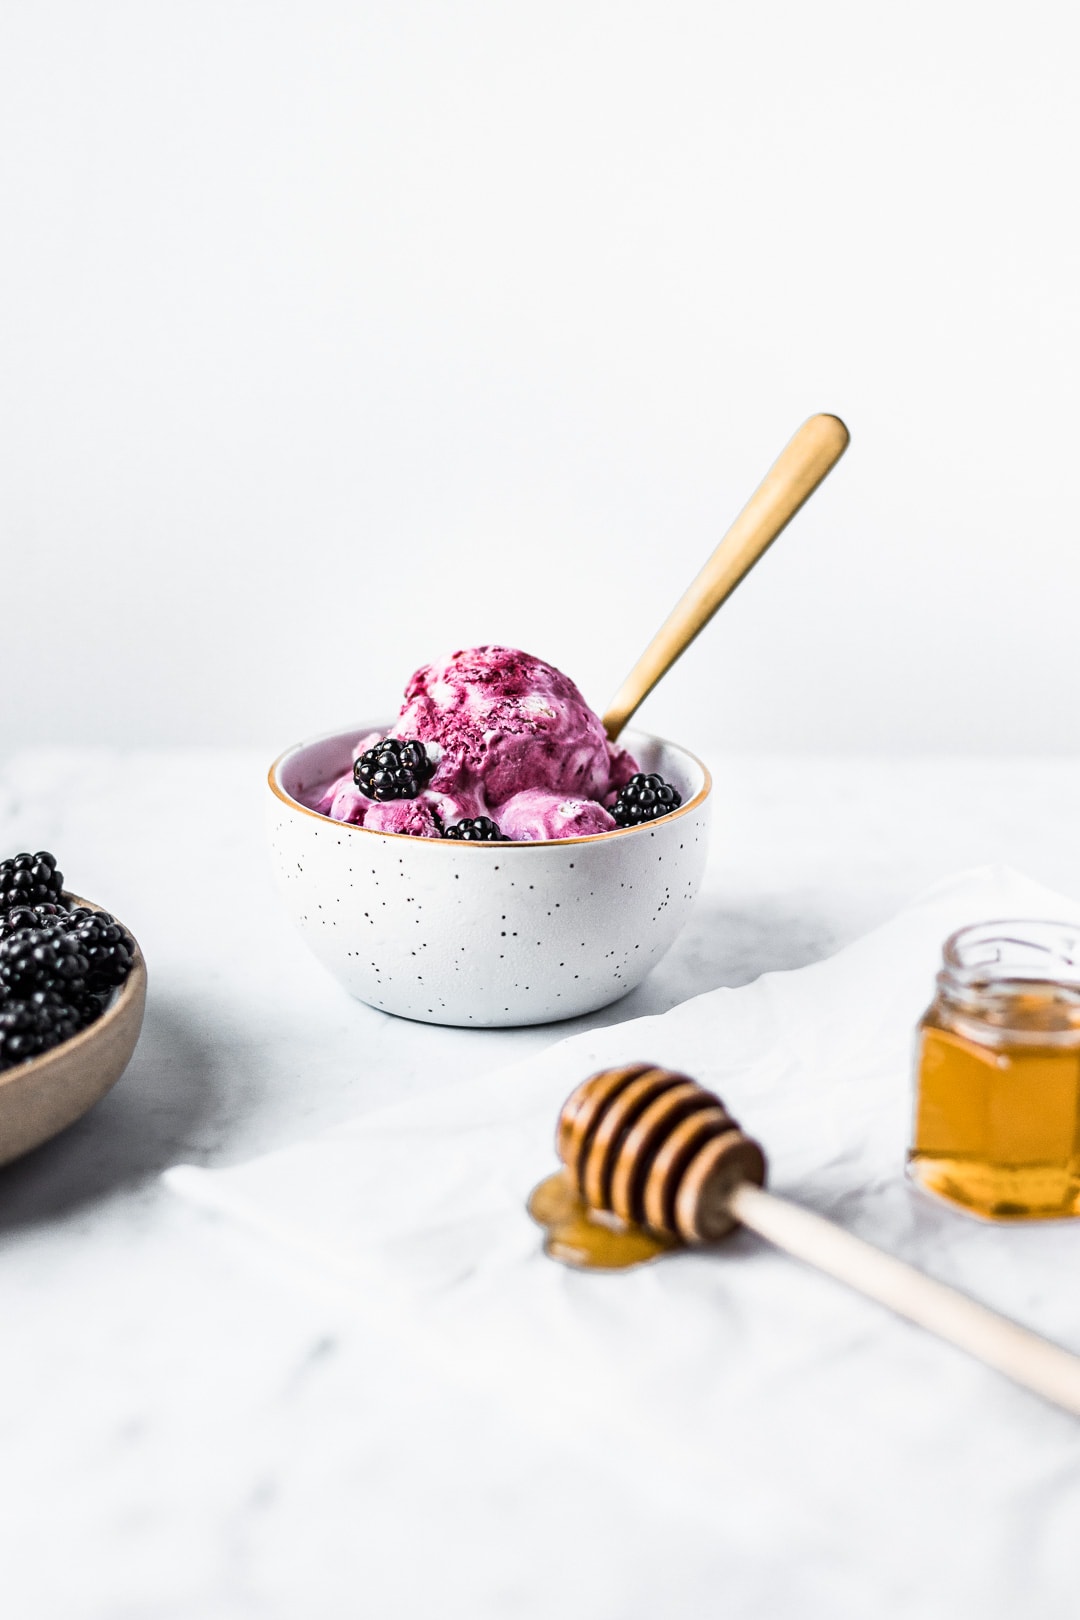 Front view of honey blackberry mascarpone ice cream scoops in a bowl with blackberries and honey in foreground